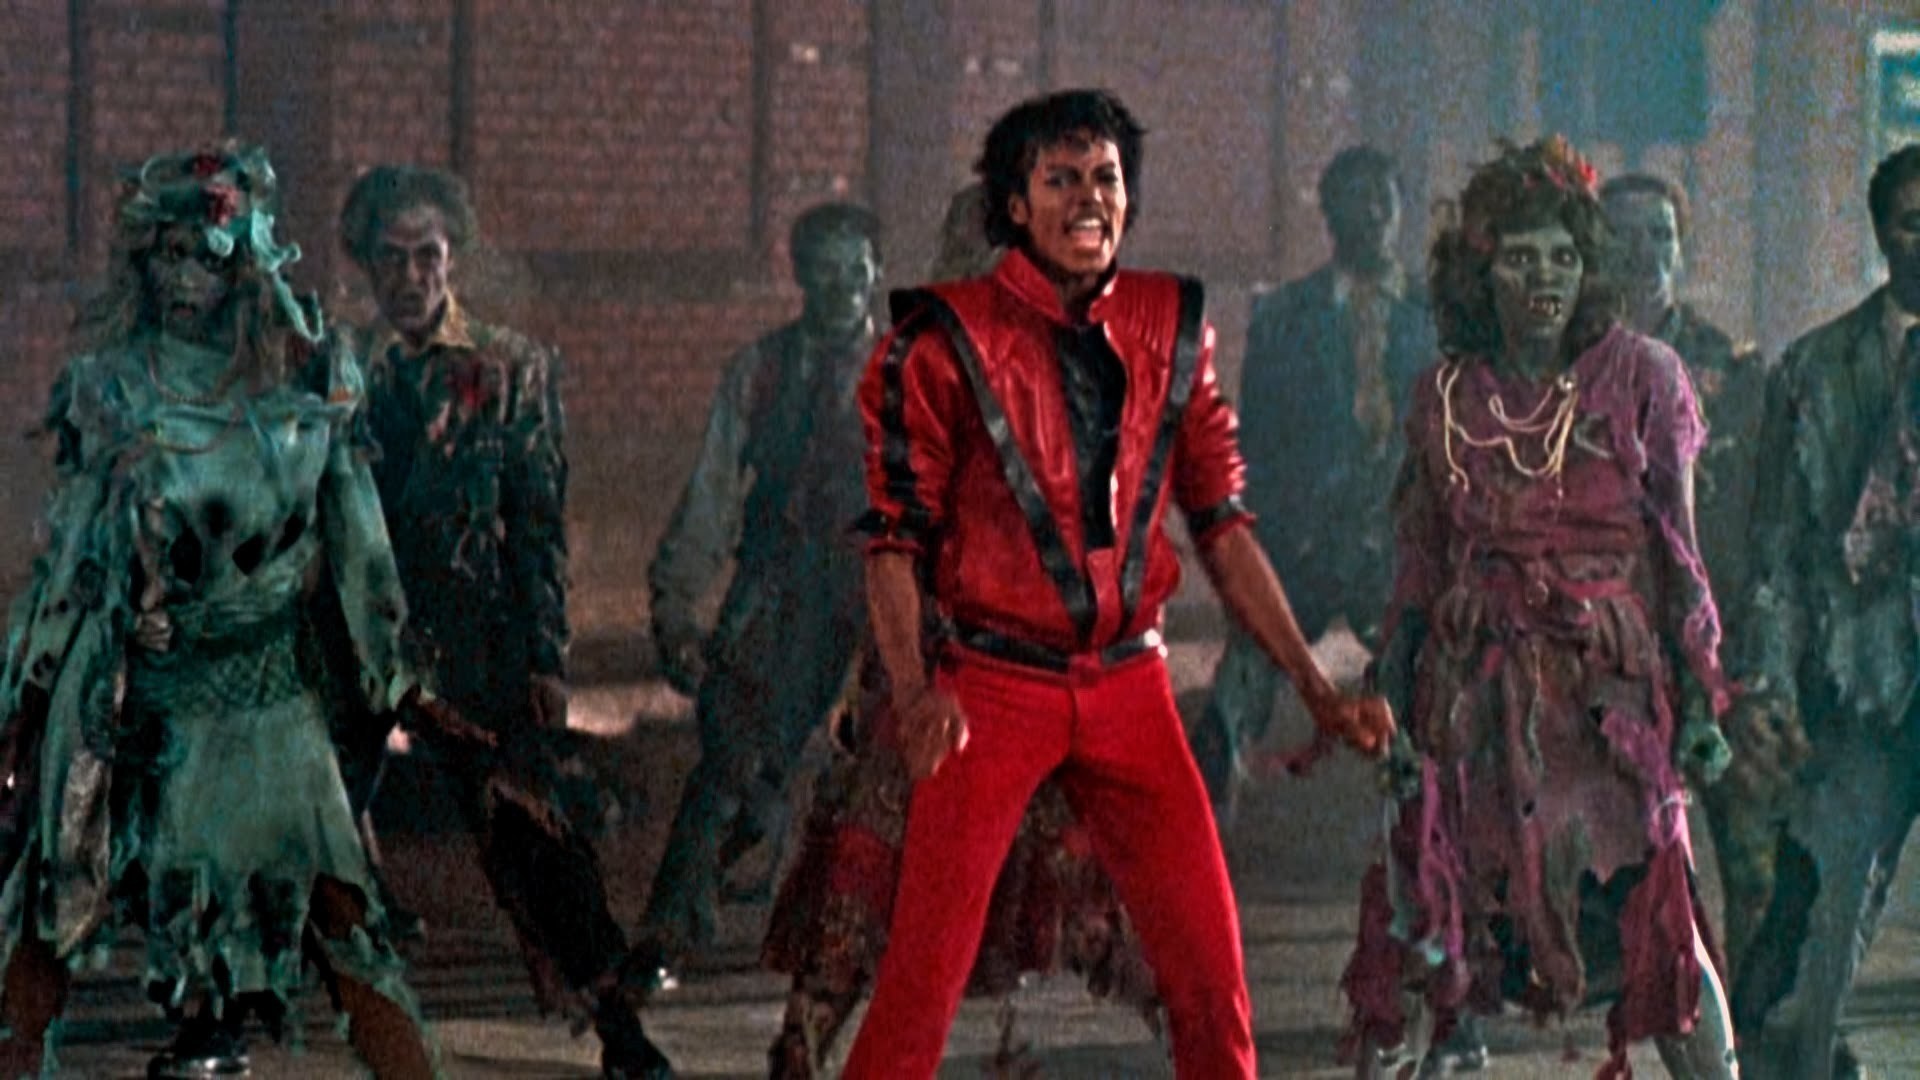 "Thriller" was originally titled "Starlight" and had the same tune, but completely different lyrics.